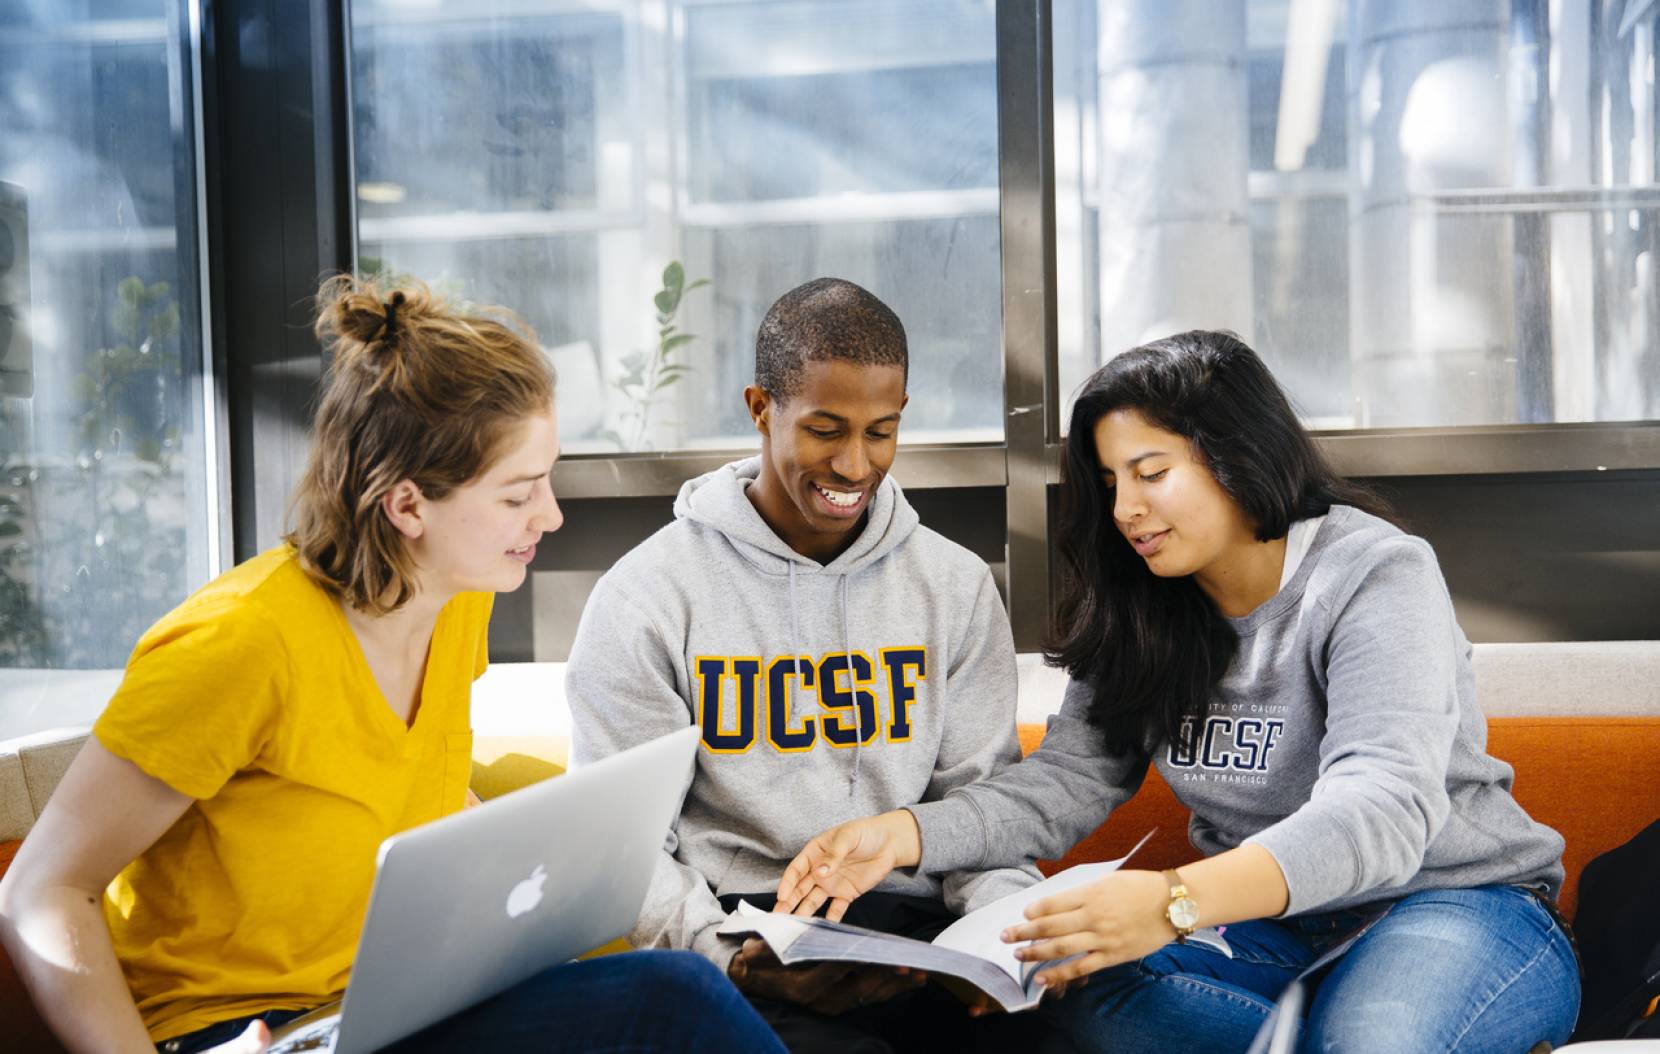 A group of three students, one in a UCSF sweatshirt